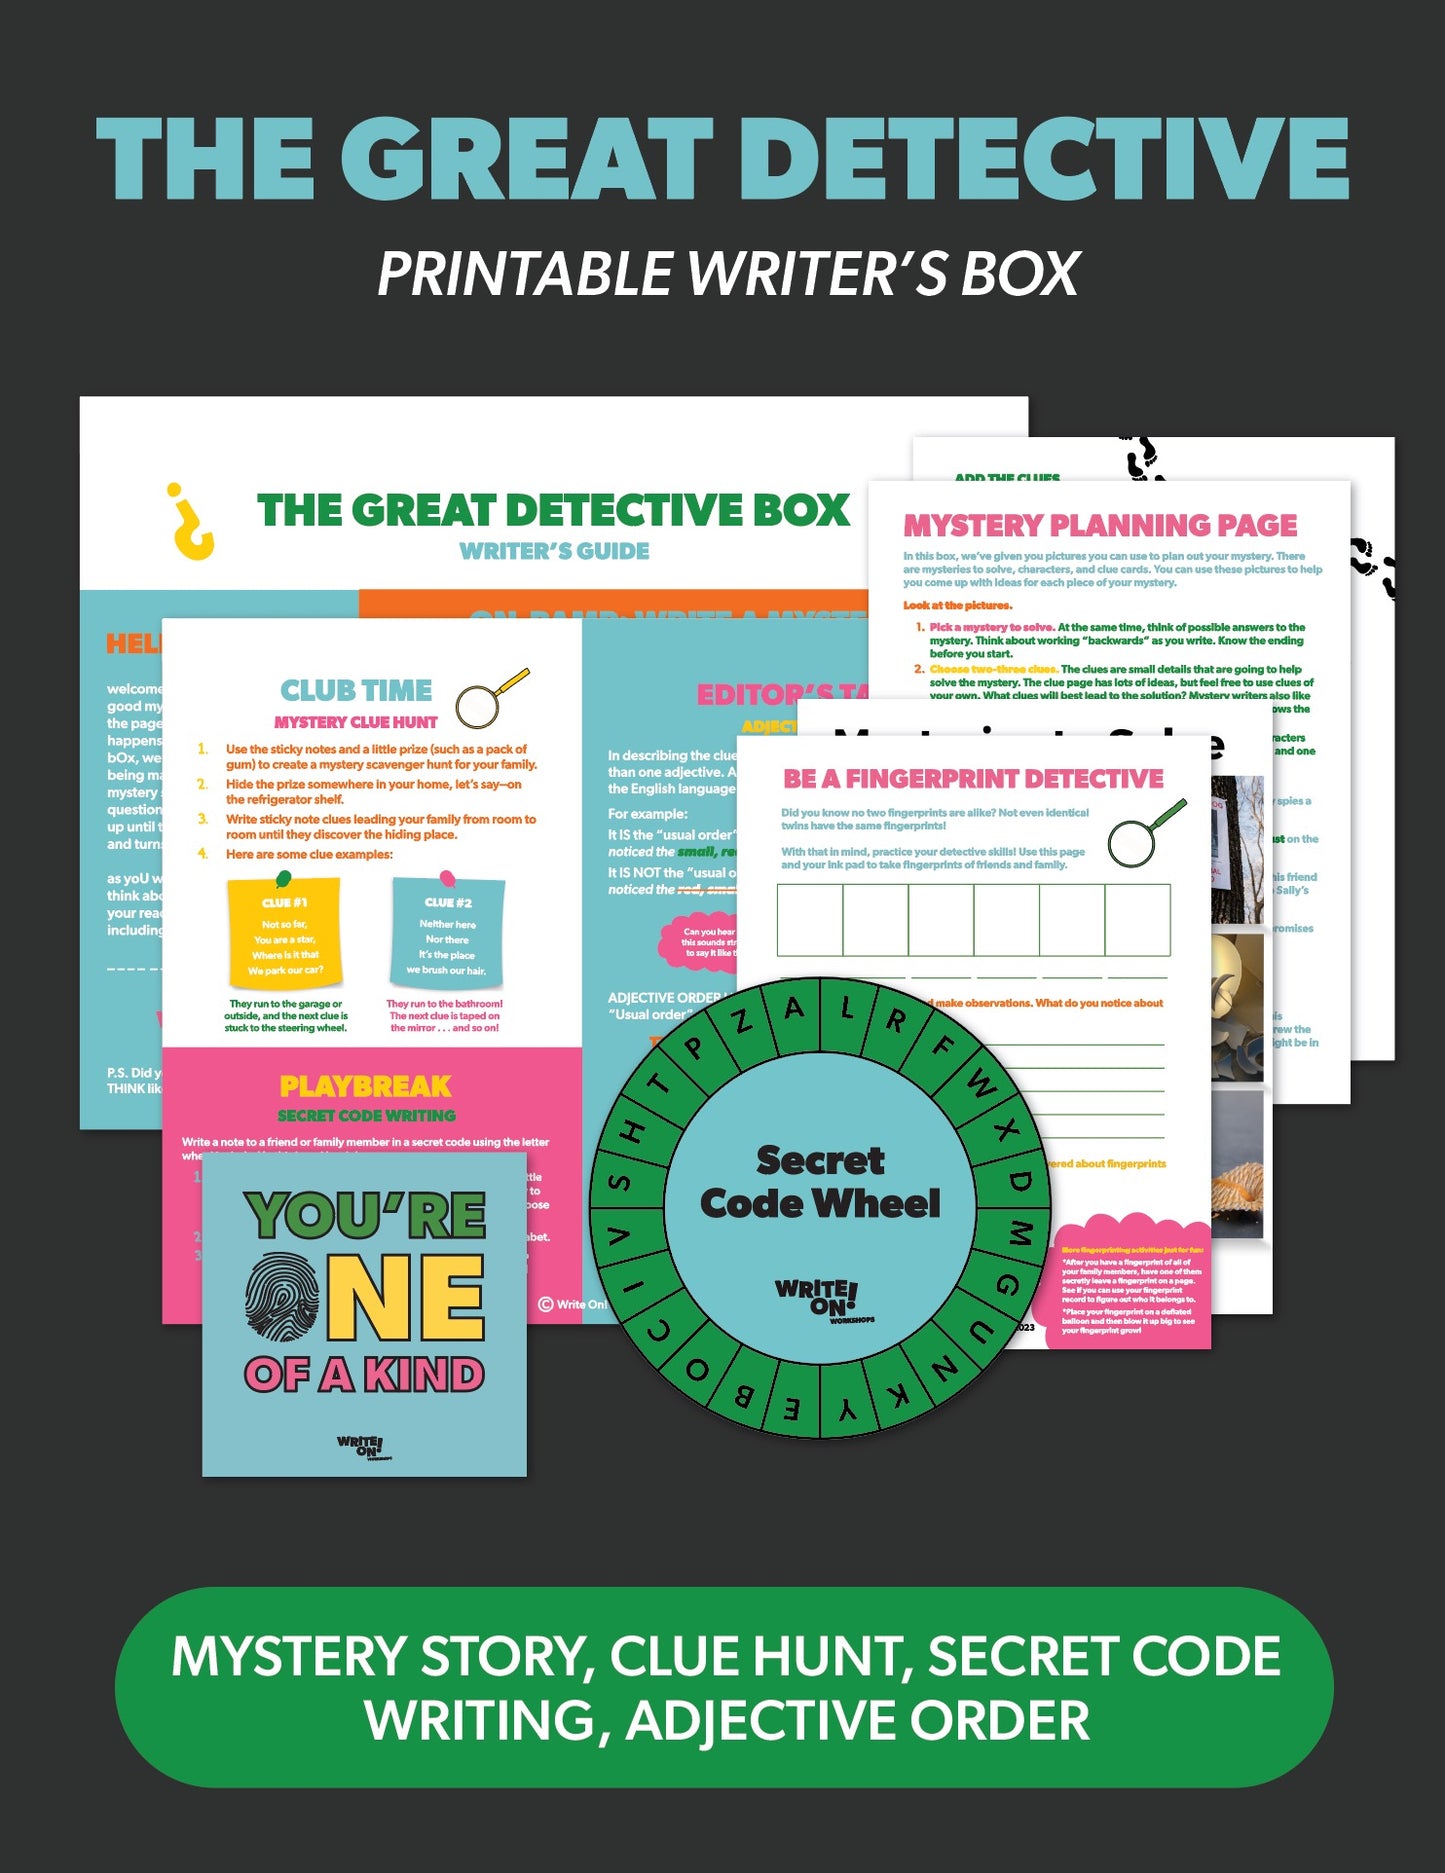 The Great Detective Writer's Box - Printable